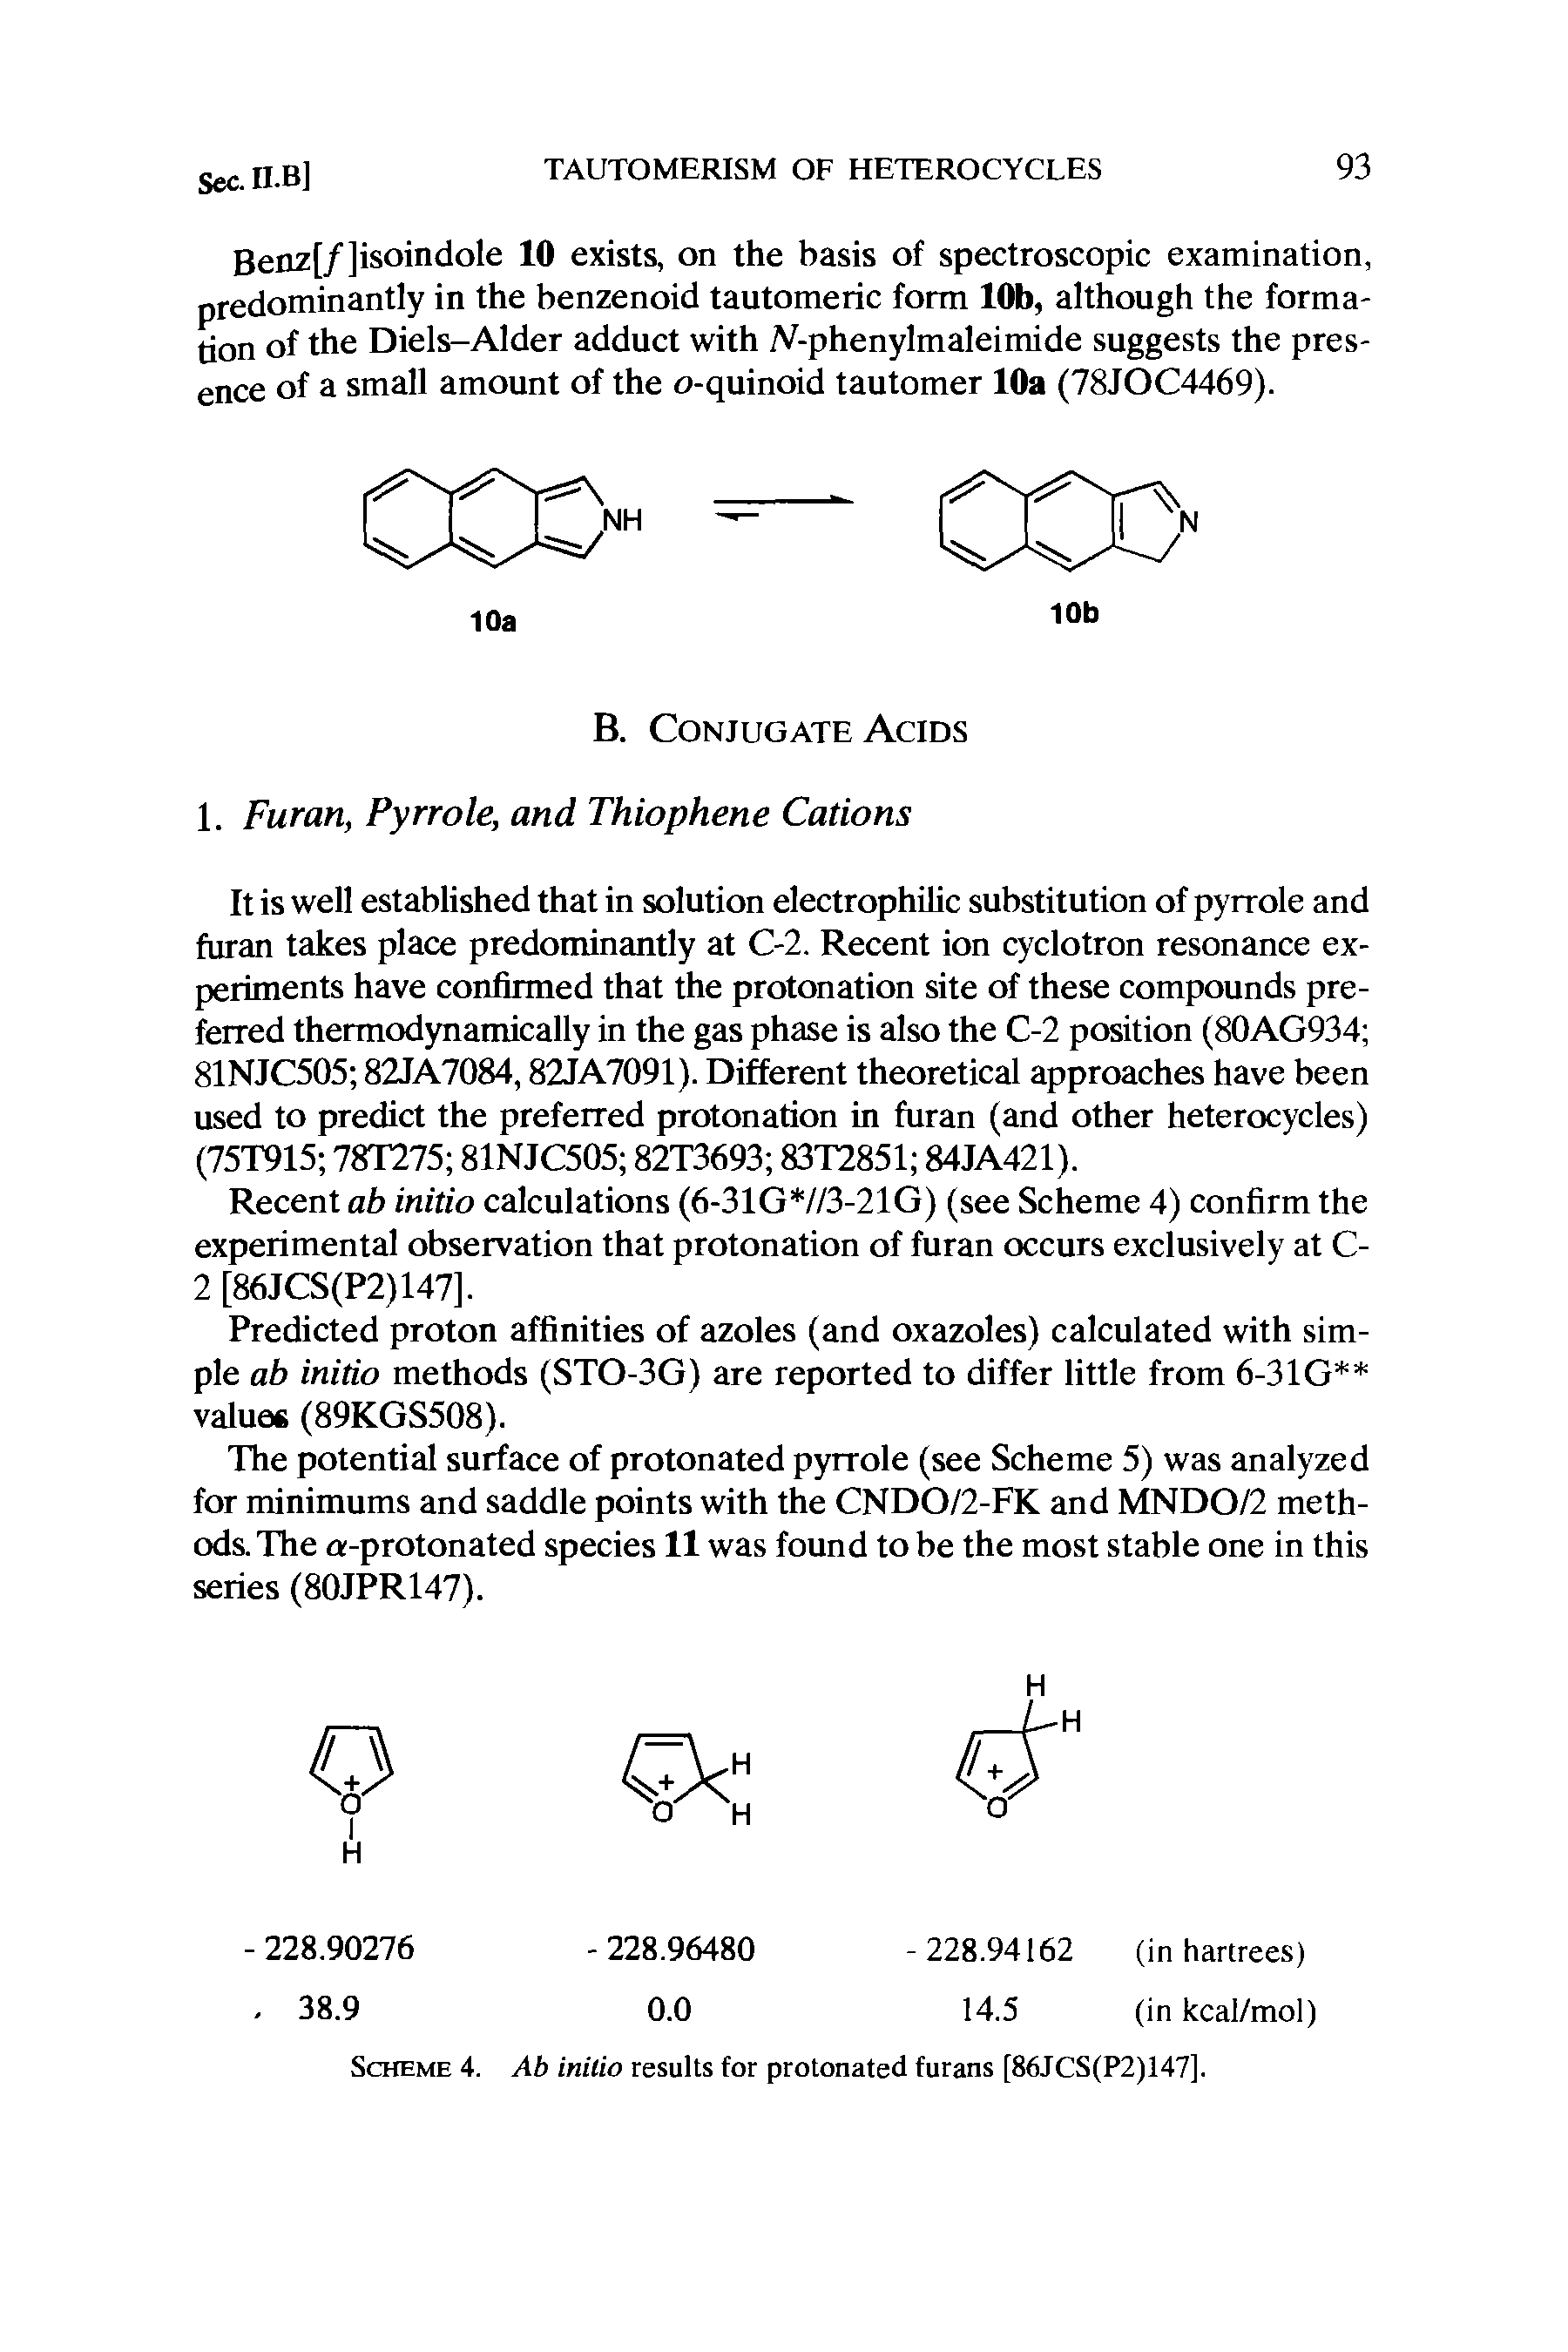 Scheme 4. Ab initio results for protonated furans [86JCS(P2)147].